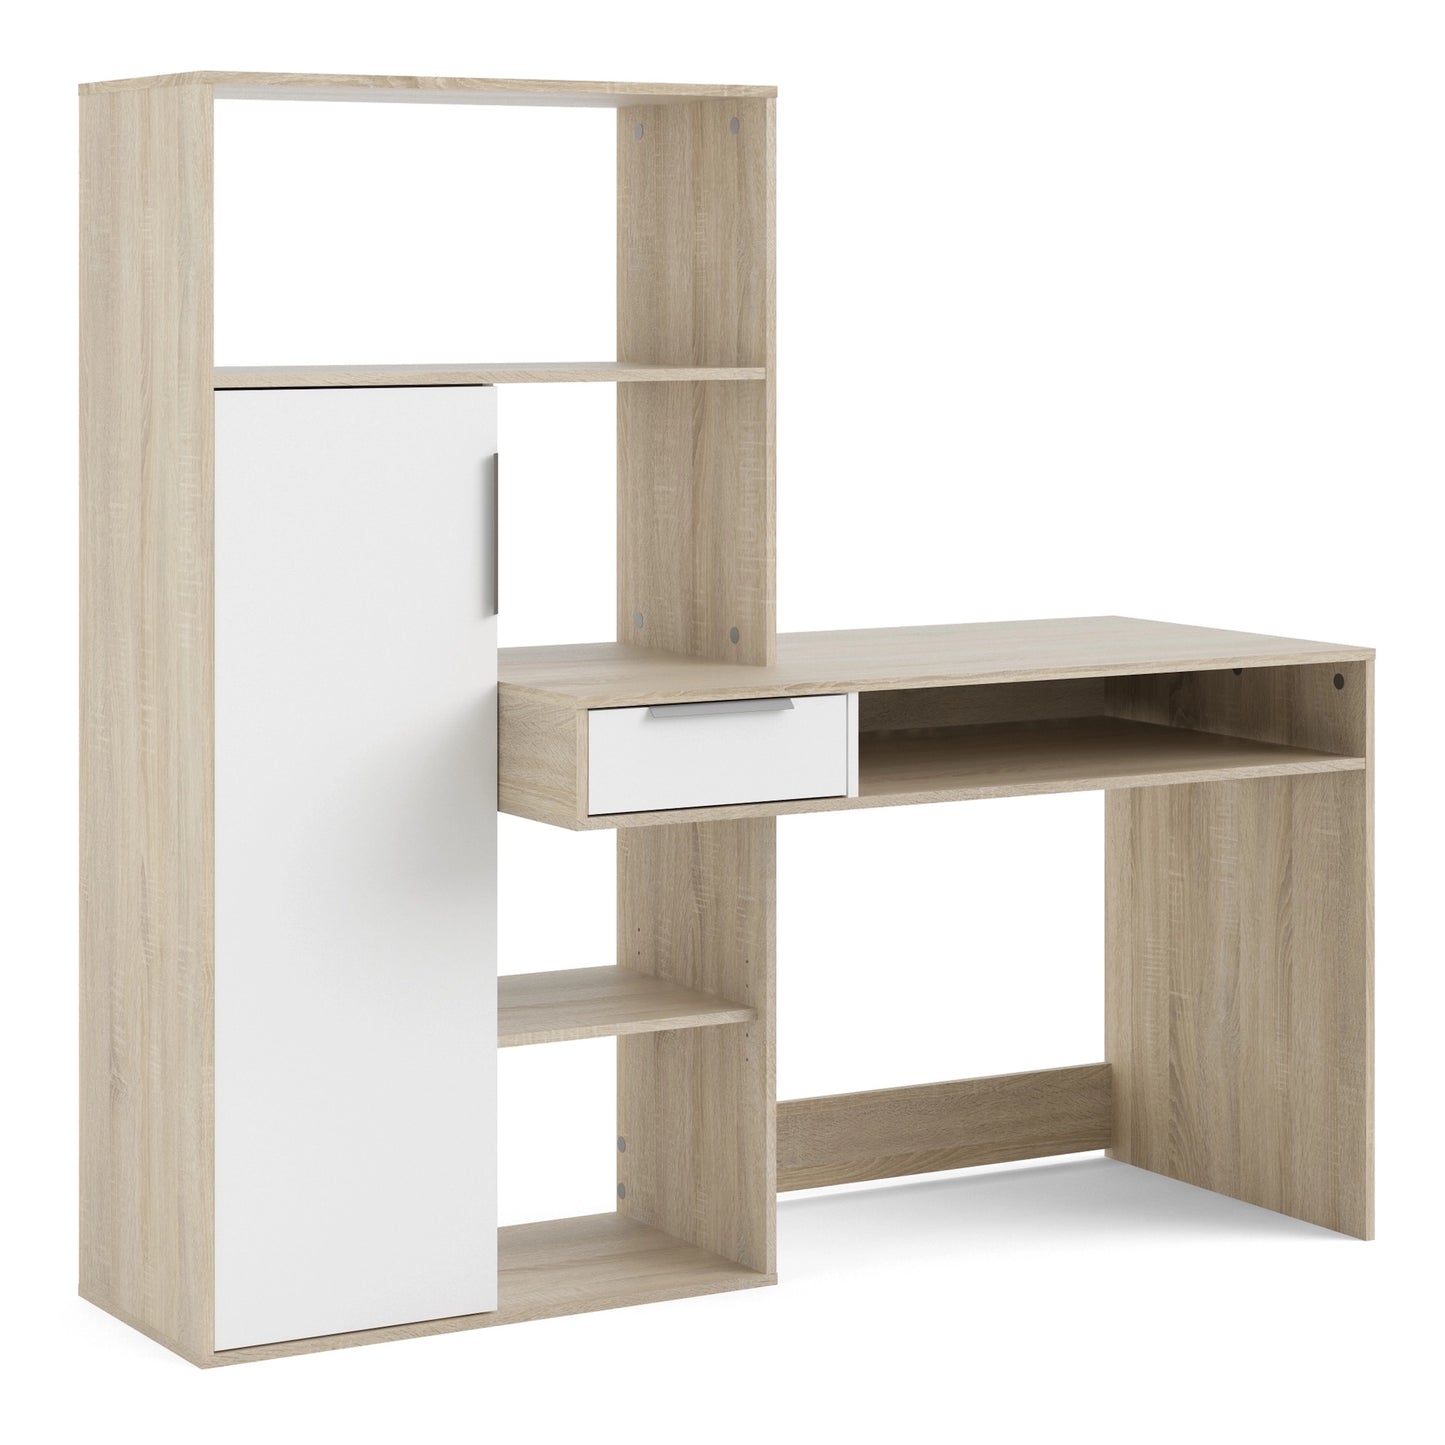 Furniture To Go Function Plus Desk Multi-Functional Desk with Drawer & 1 Door in White & Oak